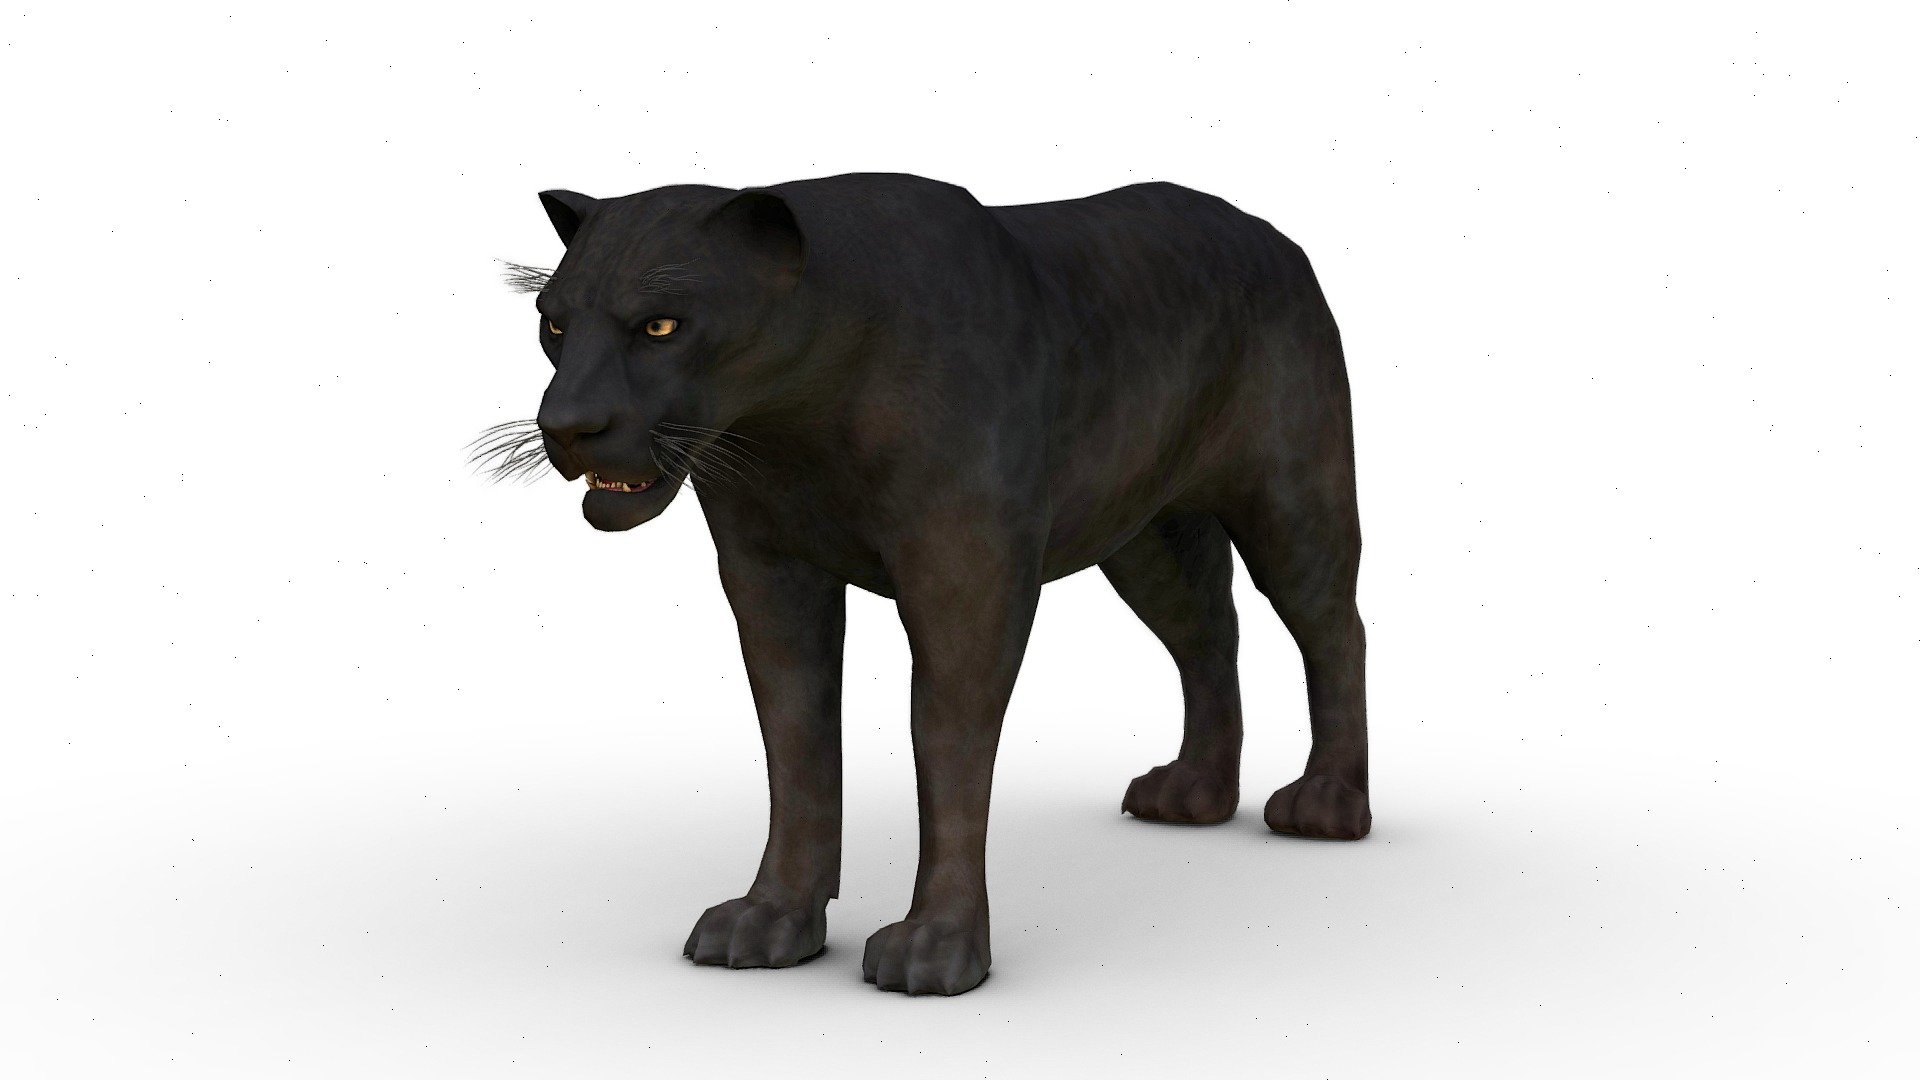 NOTE! Download the ” Additional File ” to get all file. Such as, Blend file ( Rigged &amp; Unrigged ), Fbx file, GLB file and all texture set!

|| PRODUCT DESCRIPTION ||
-This is a model of a Black Panther
-Originally created with Blender
-Model resolutions are optimized for polygon efficiency
-The model is fully textured with all materials applied.

This model contains ;
Static model, 
Bonus Rig model (using rigify blender), 
PBR Texture (Diffuse, Rougness, Metallic, Nomal Map and Heightmap) and blender principled bsdf texture set

|| USAGE ||

-This model is suitable for use in your game, film, advertising, AR/VR, Presentation, etc.

|| SPECS ||

Polycount (Quads)
Vertices 6,731 Faces 6,661 Triangles 12,680 - 3D Black Panther - Buy Royalty Free 3D model by Animabyfad 3d model